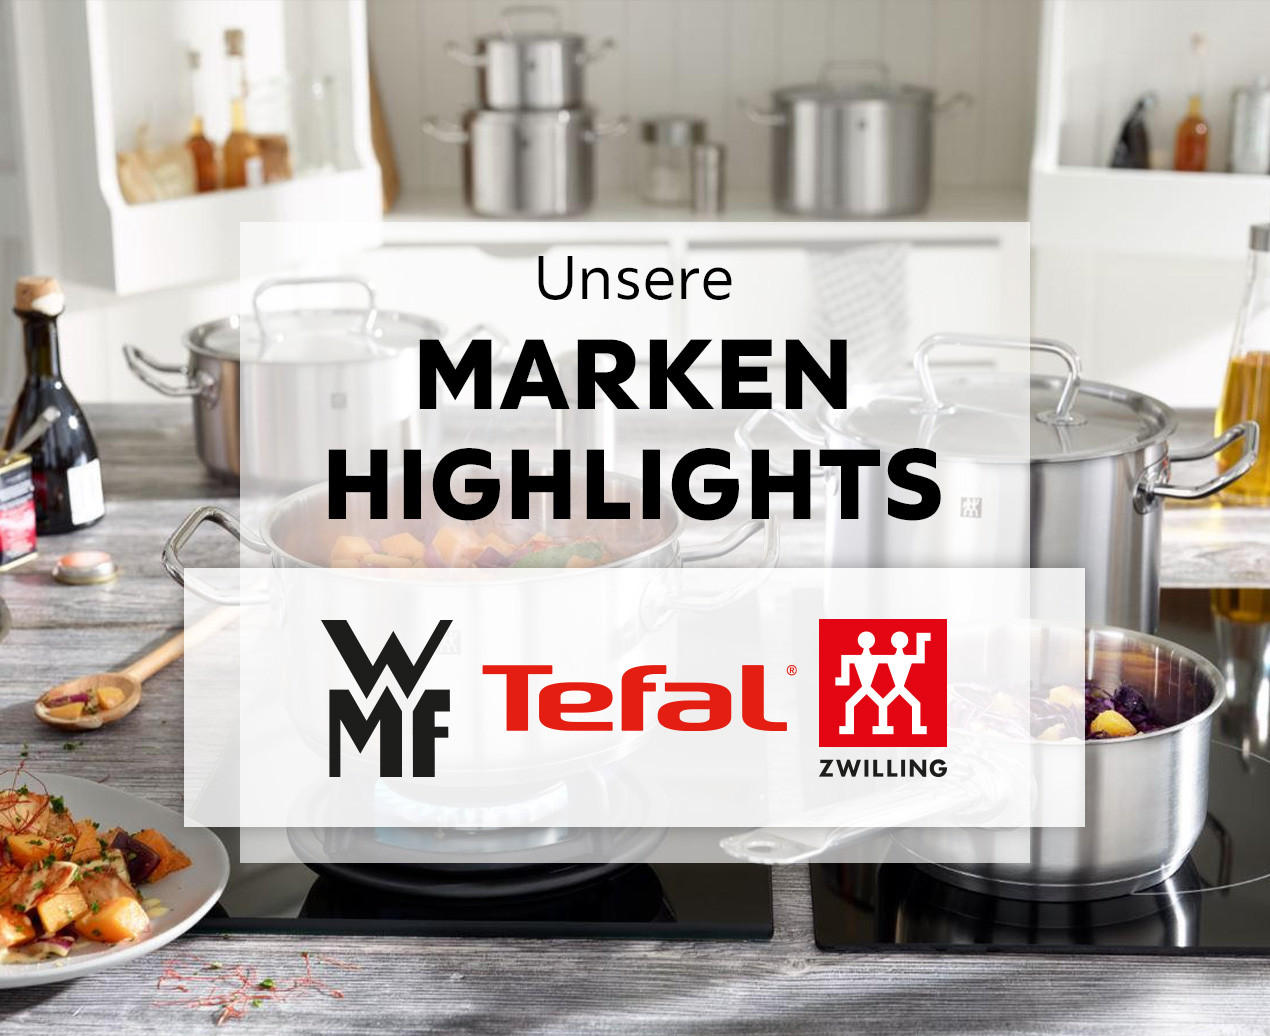 Unsere Markenhighlights: WMF, Zwilling, Tefal